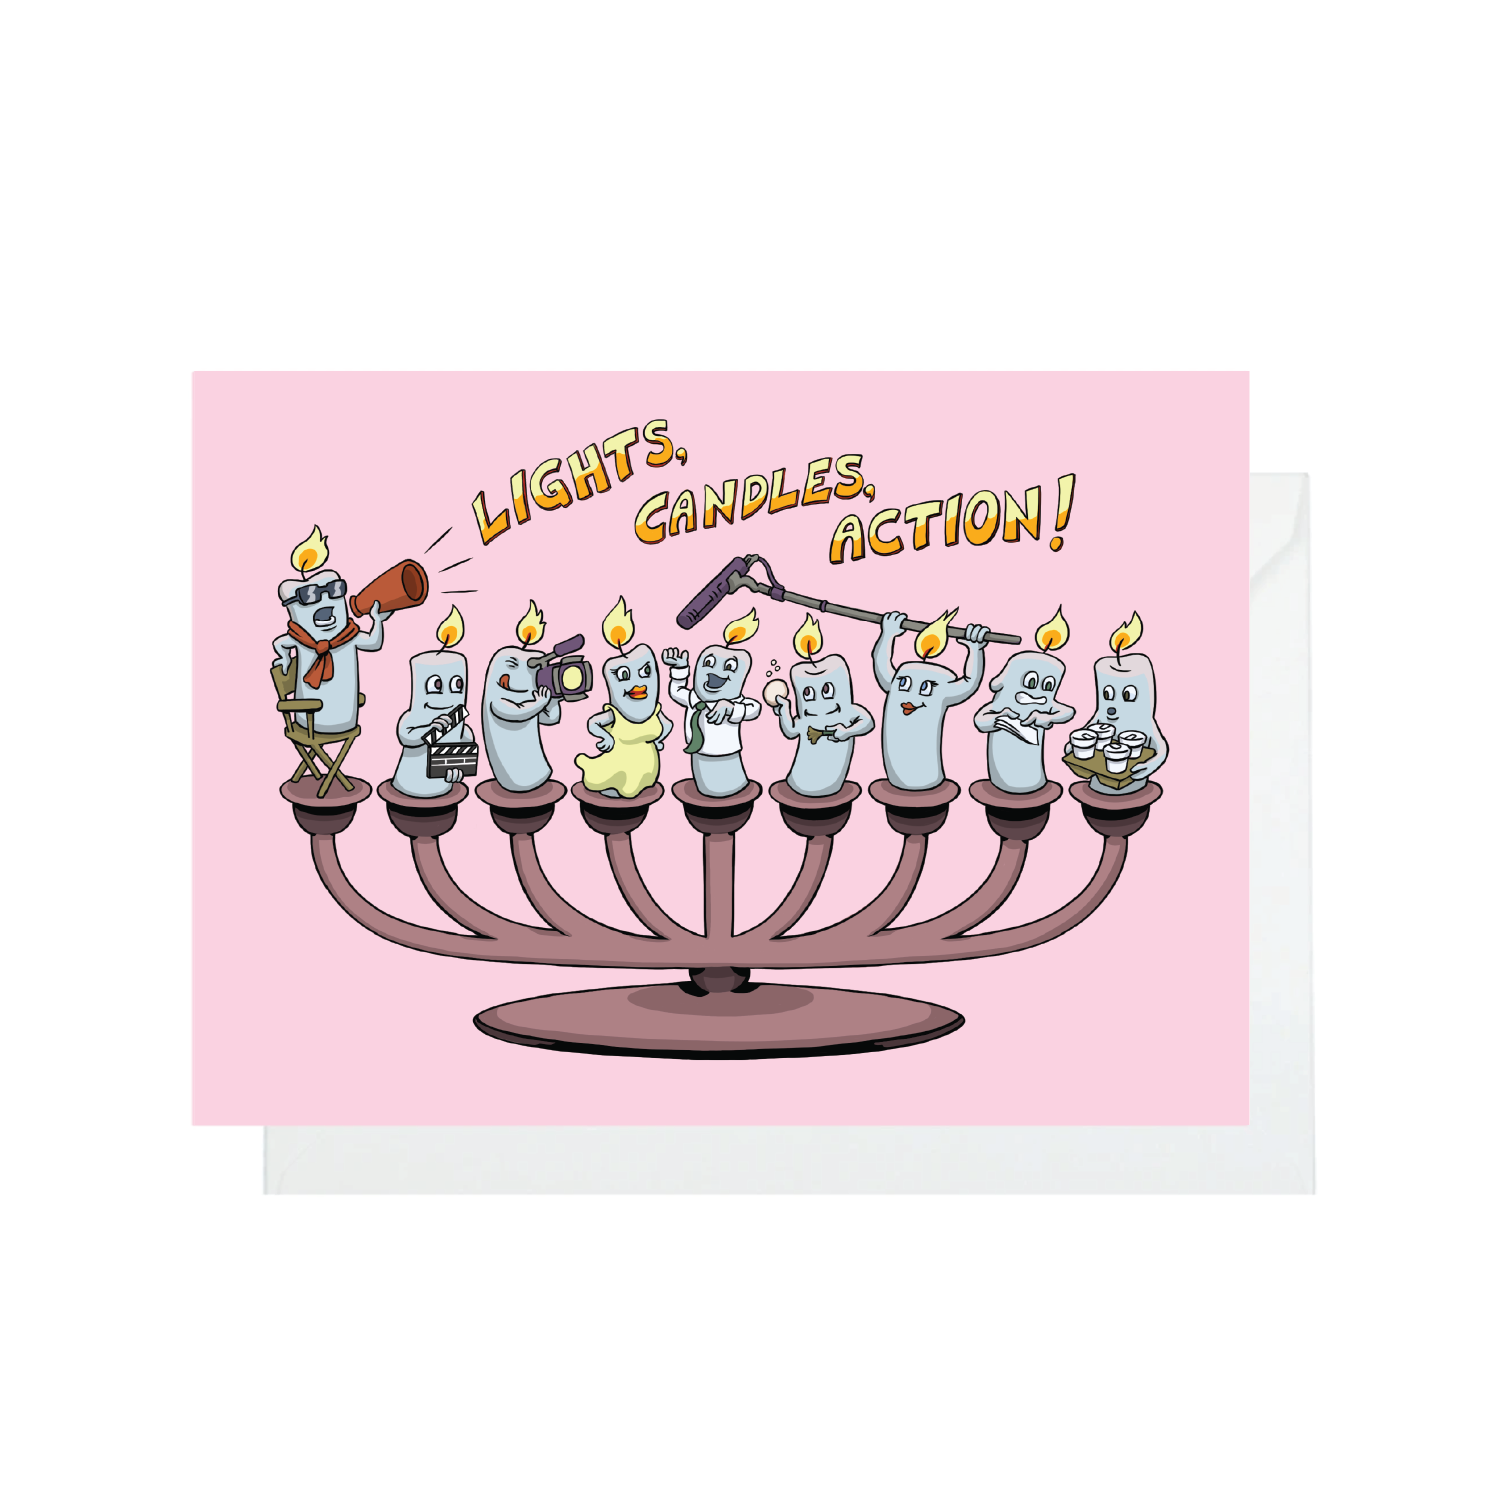 Lights, Candles, Action! -  Funny Hanukkah Card by Menschions